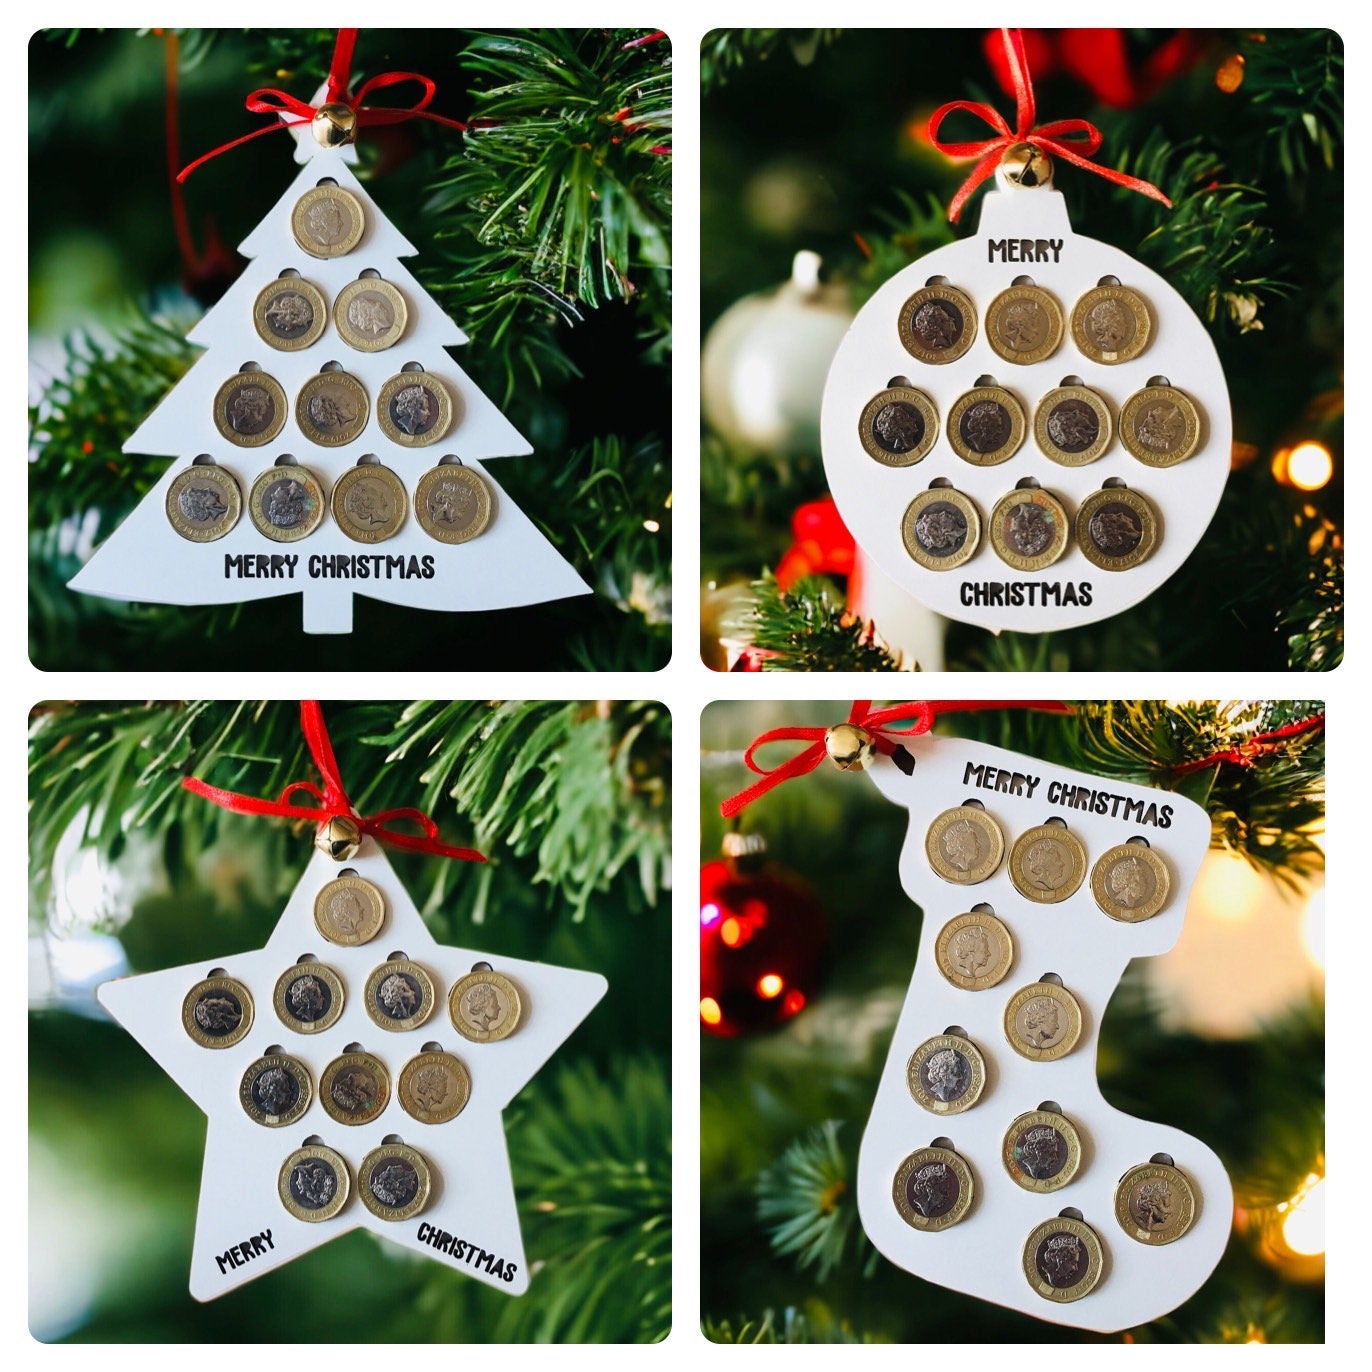 Popular Coin Gift Ideas for the Holiday Season